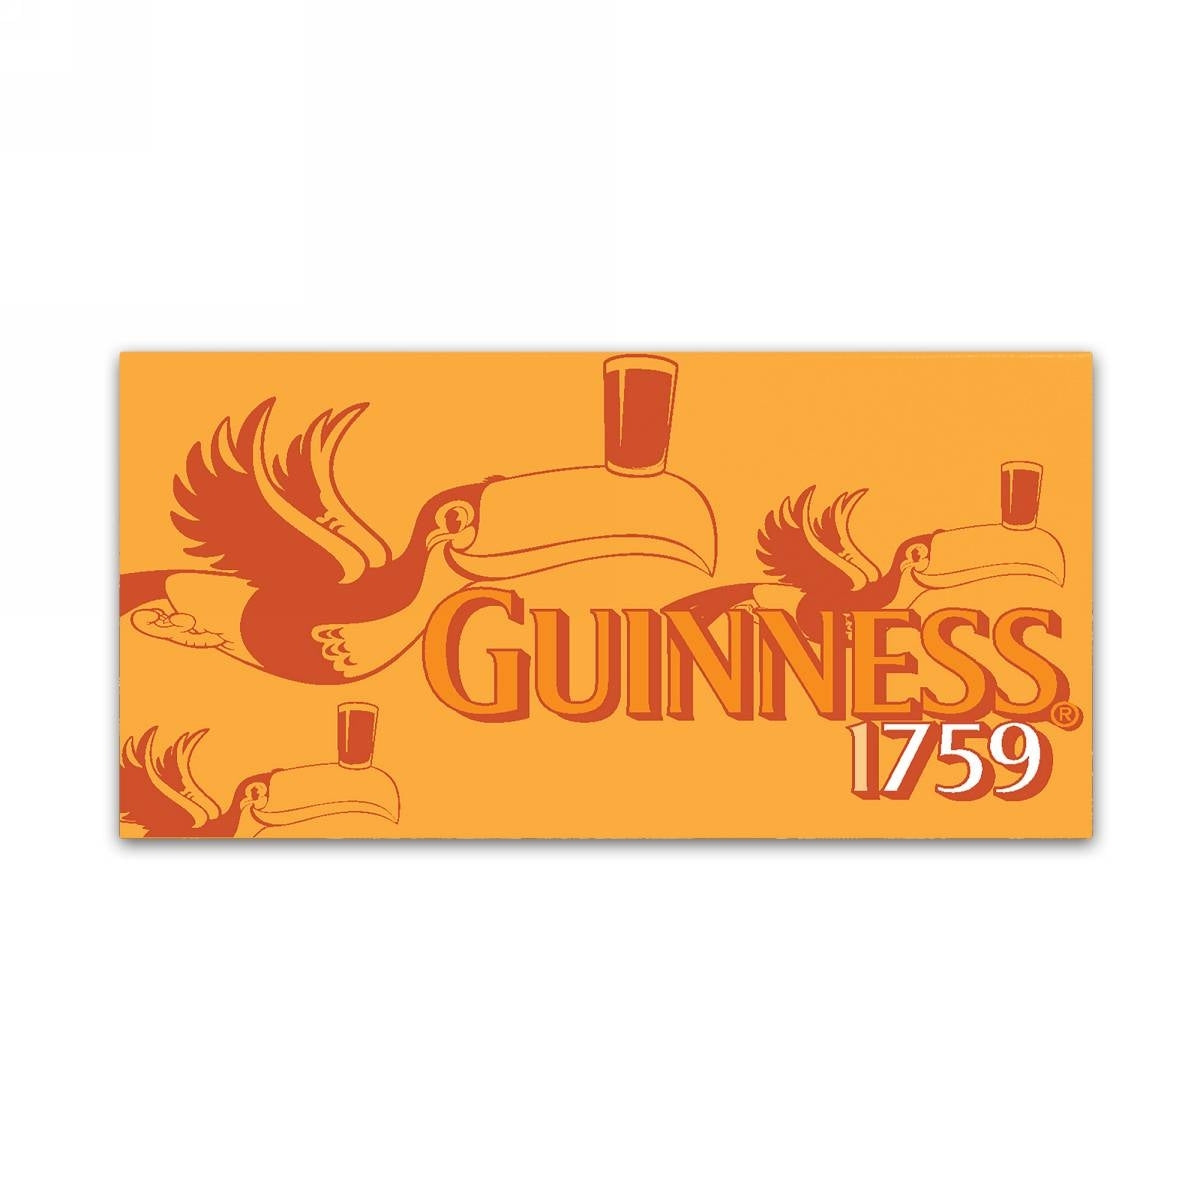 Canvas art with the iconic Guinness Brewery 'Guinness 1759' logo on an orange background.